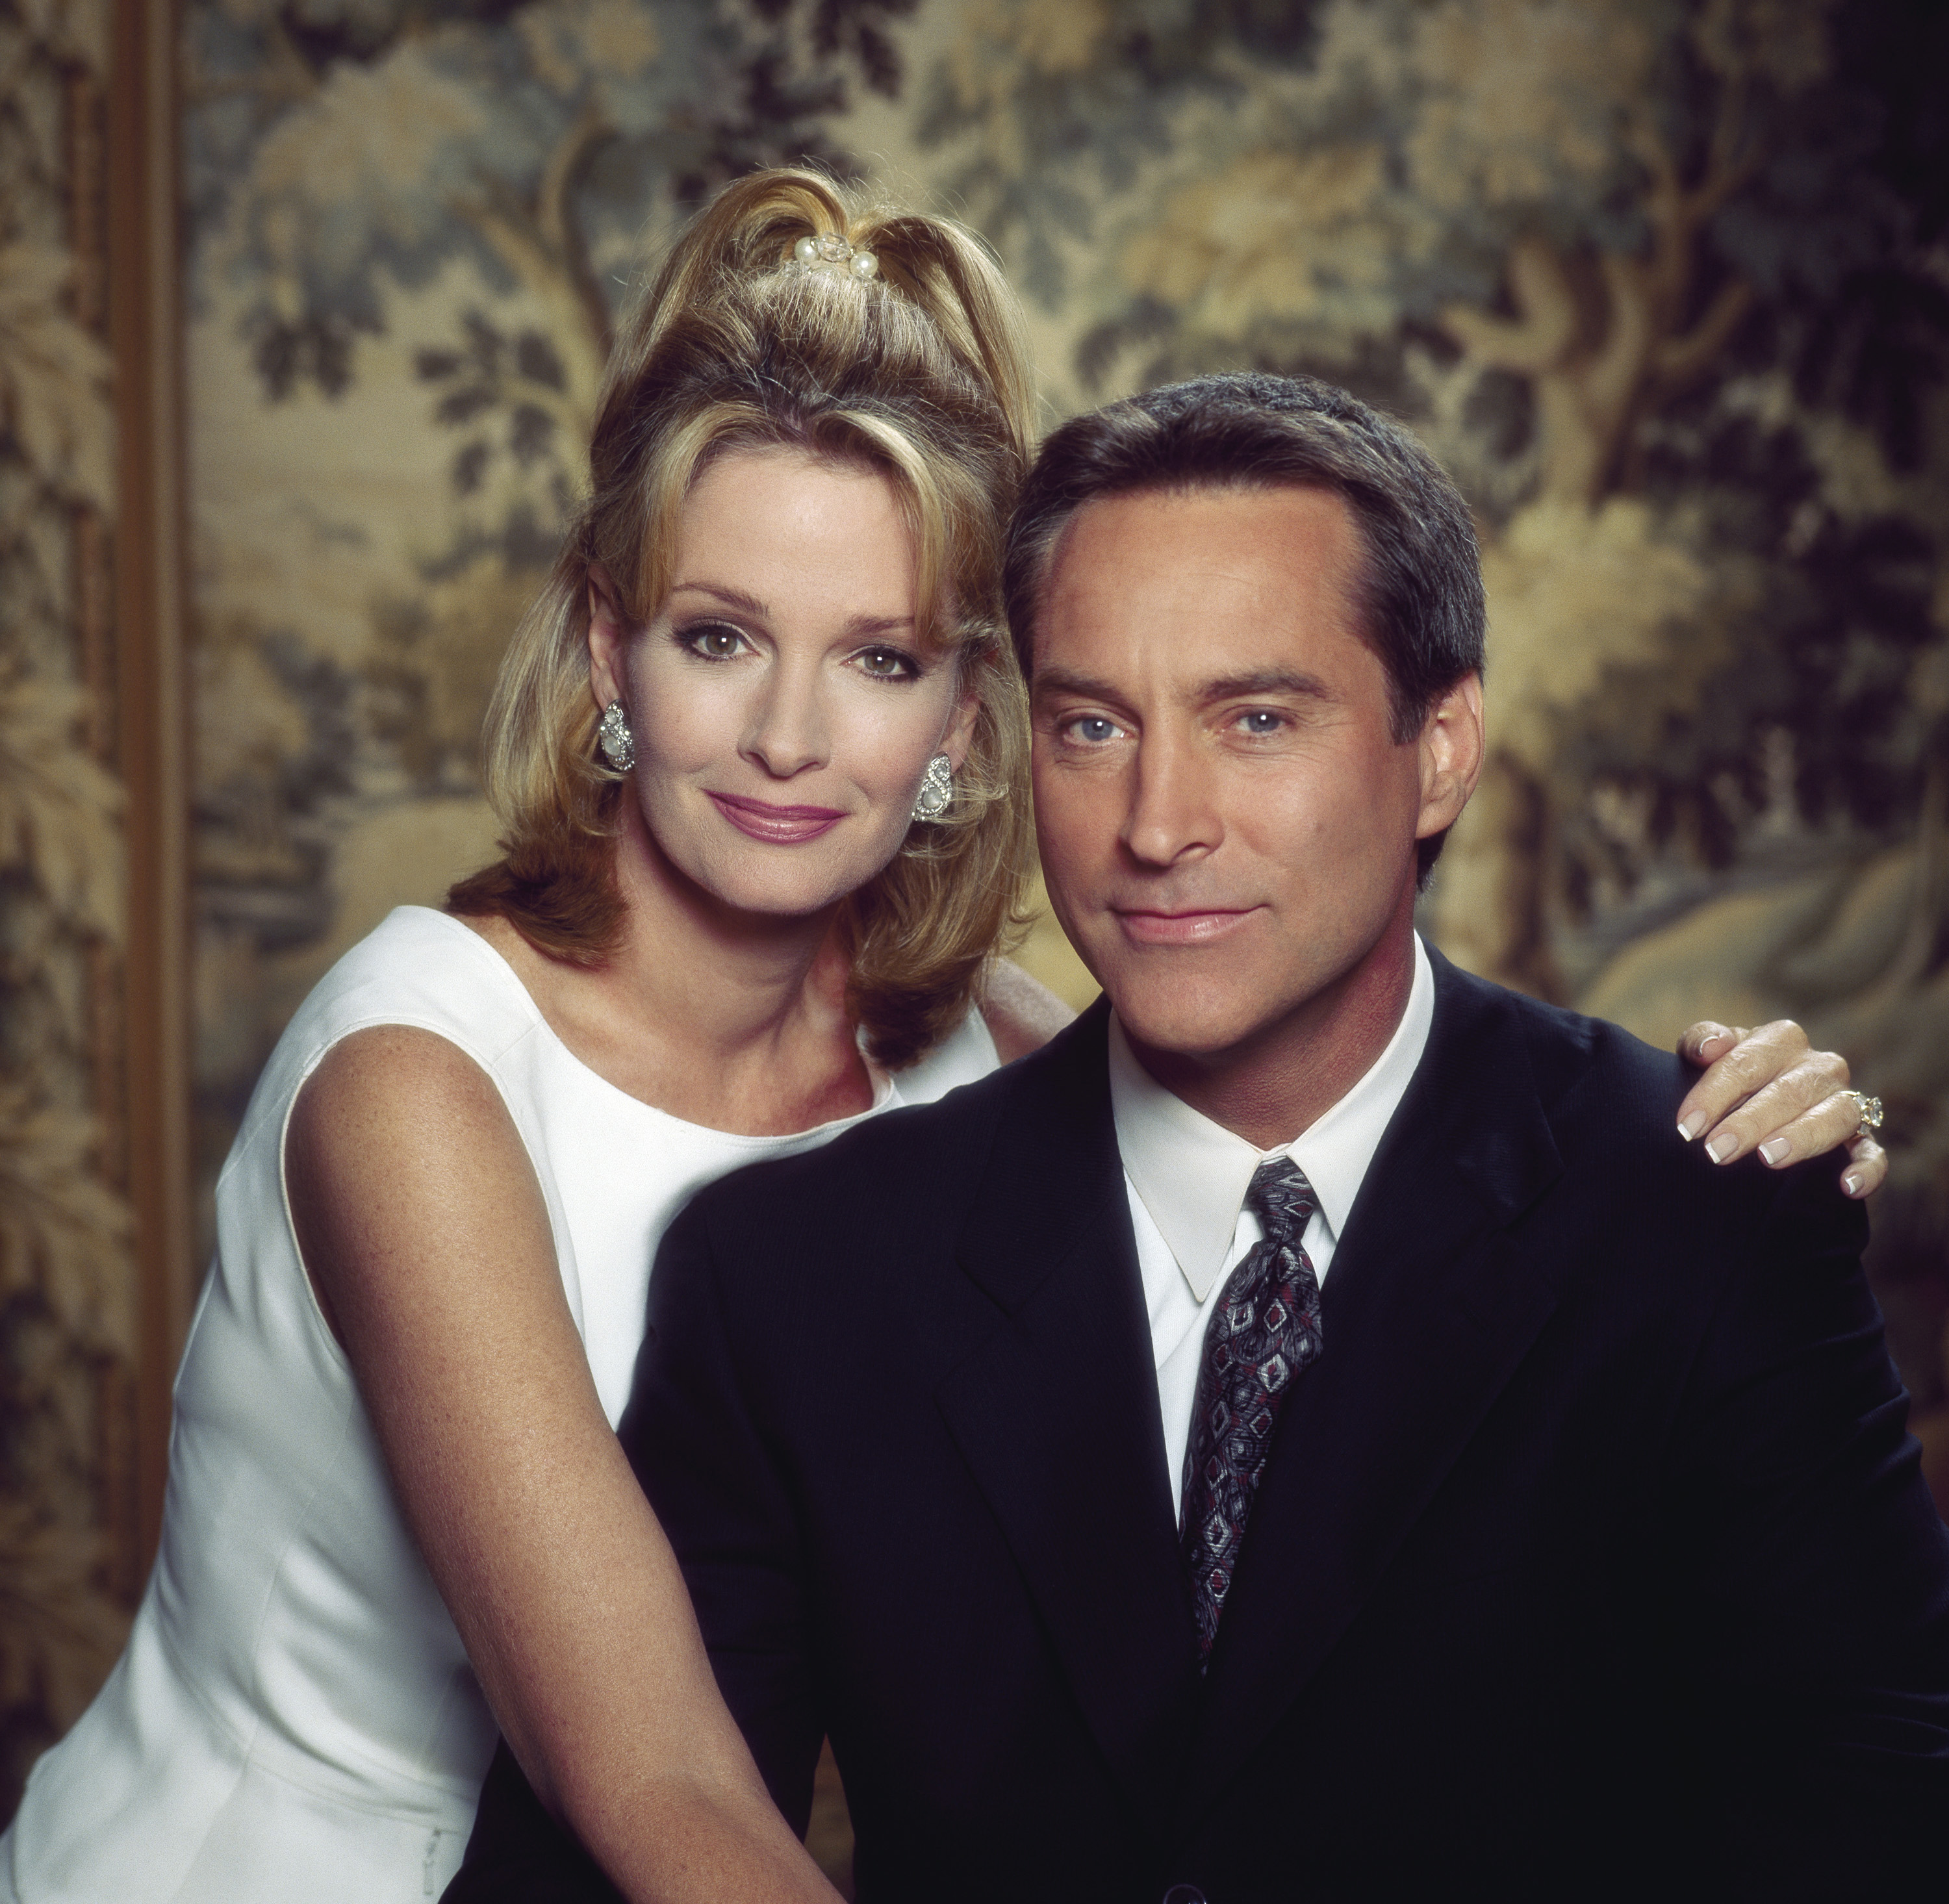 Deidre Hall as Dr. Marlena Evans and Drake Hogestyn as John Black on an undated "Days of our Lives" photo | Source: Getty Images